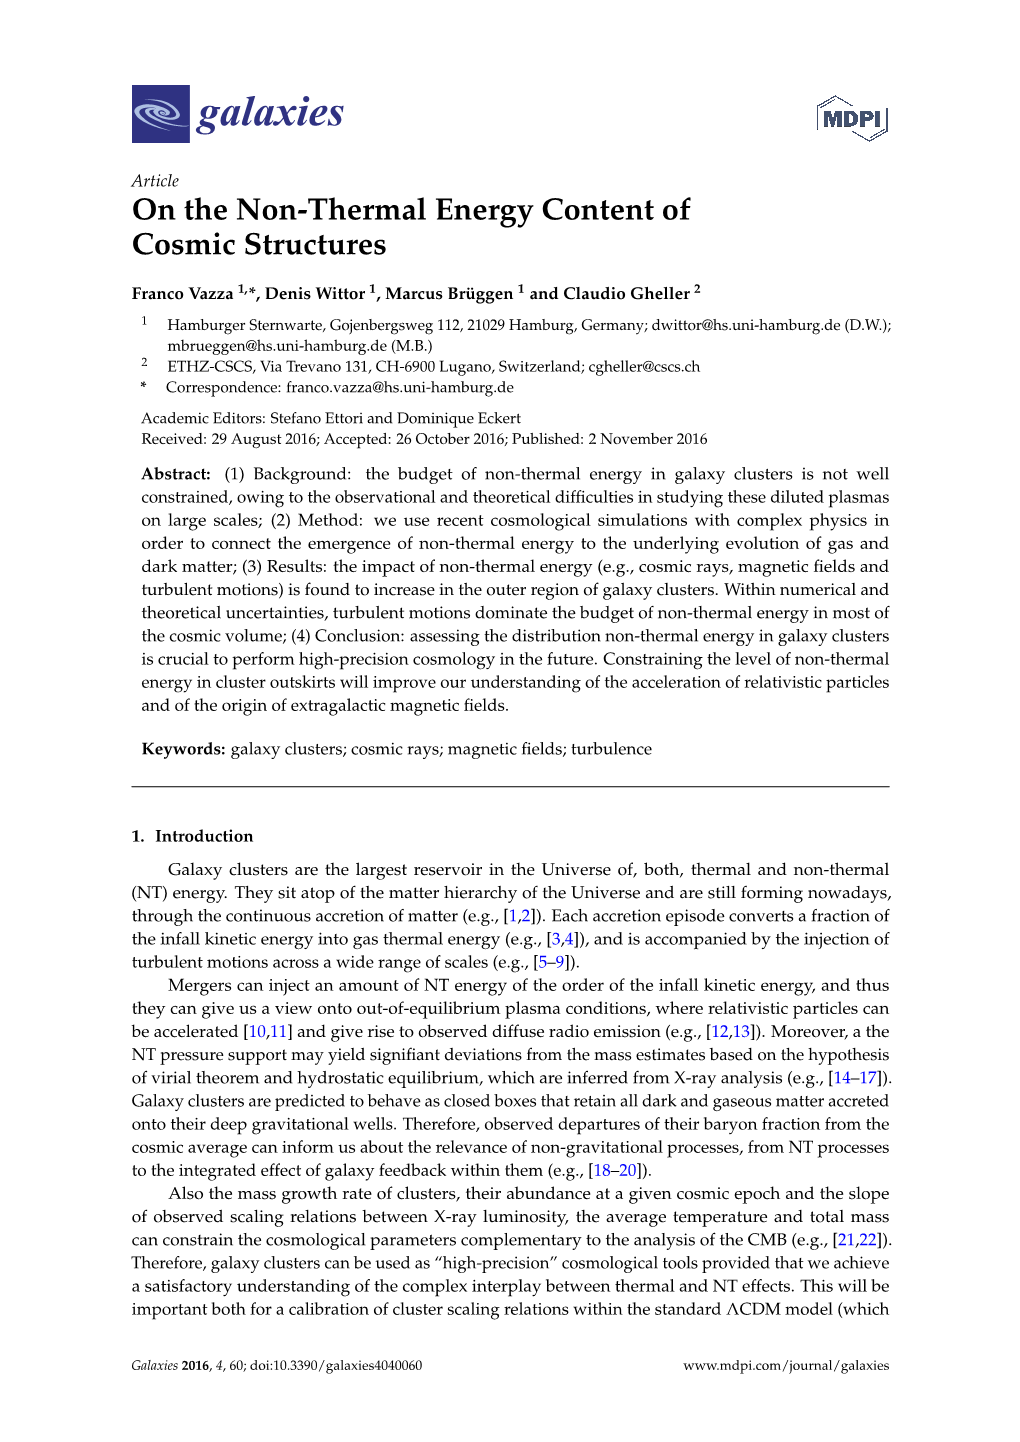 On the Non-Thermal Energy Content of Cosmic Structures